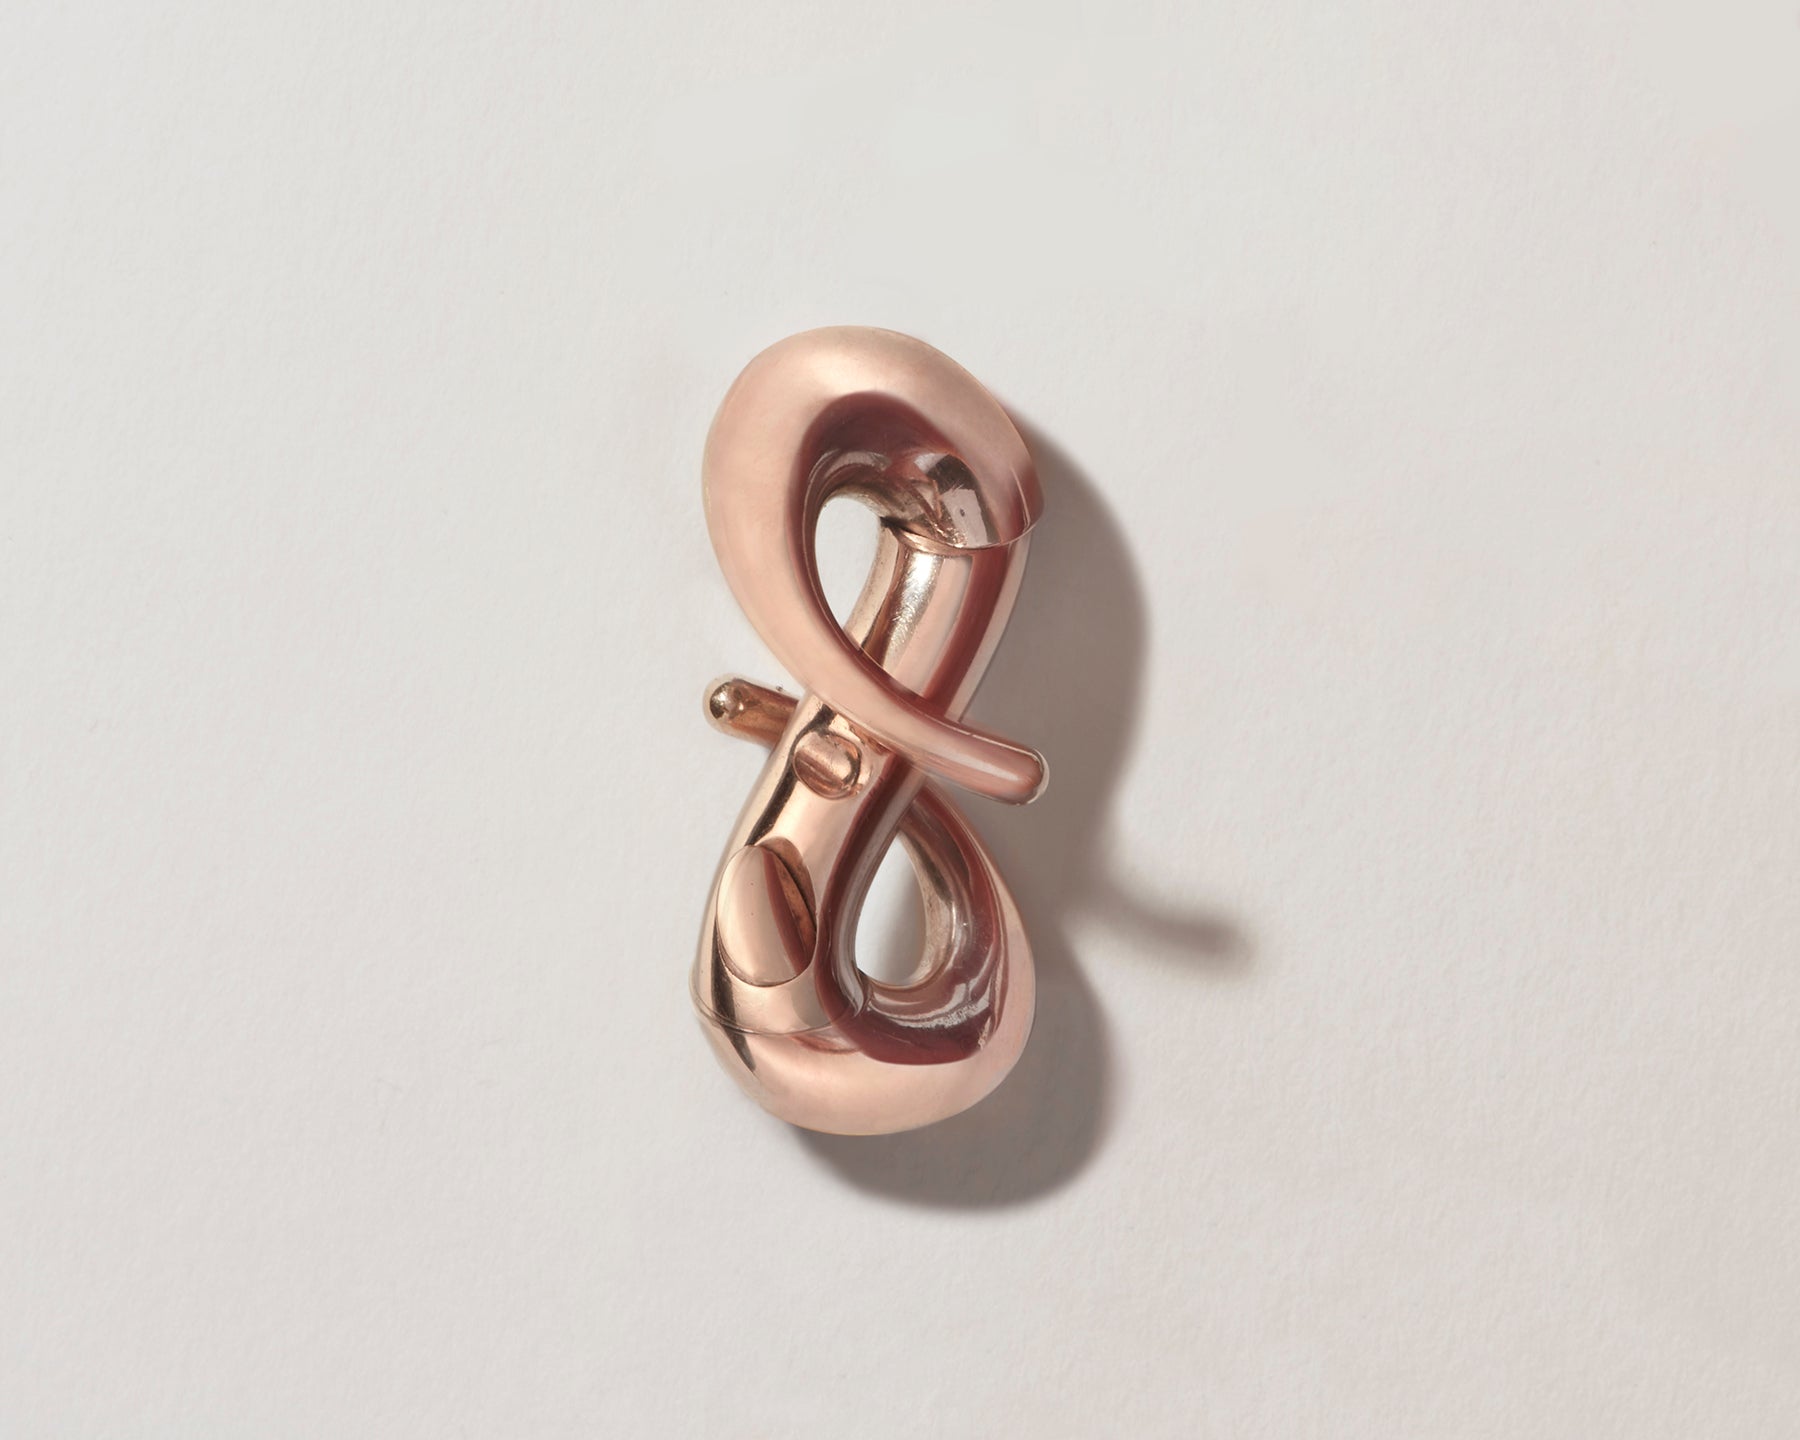 Rose gold infinity lock with clasp open against gray backdrop